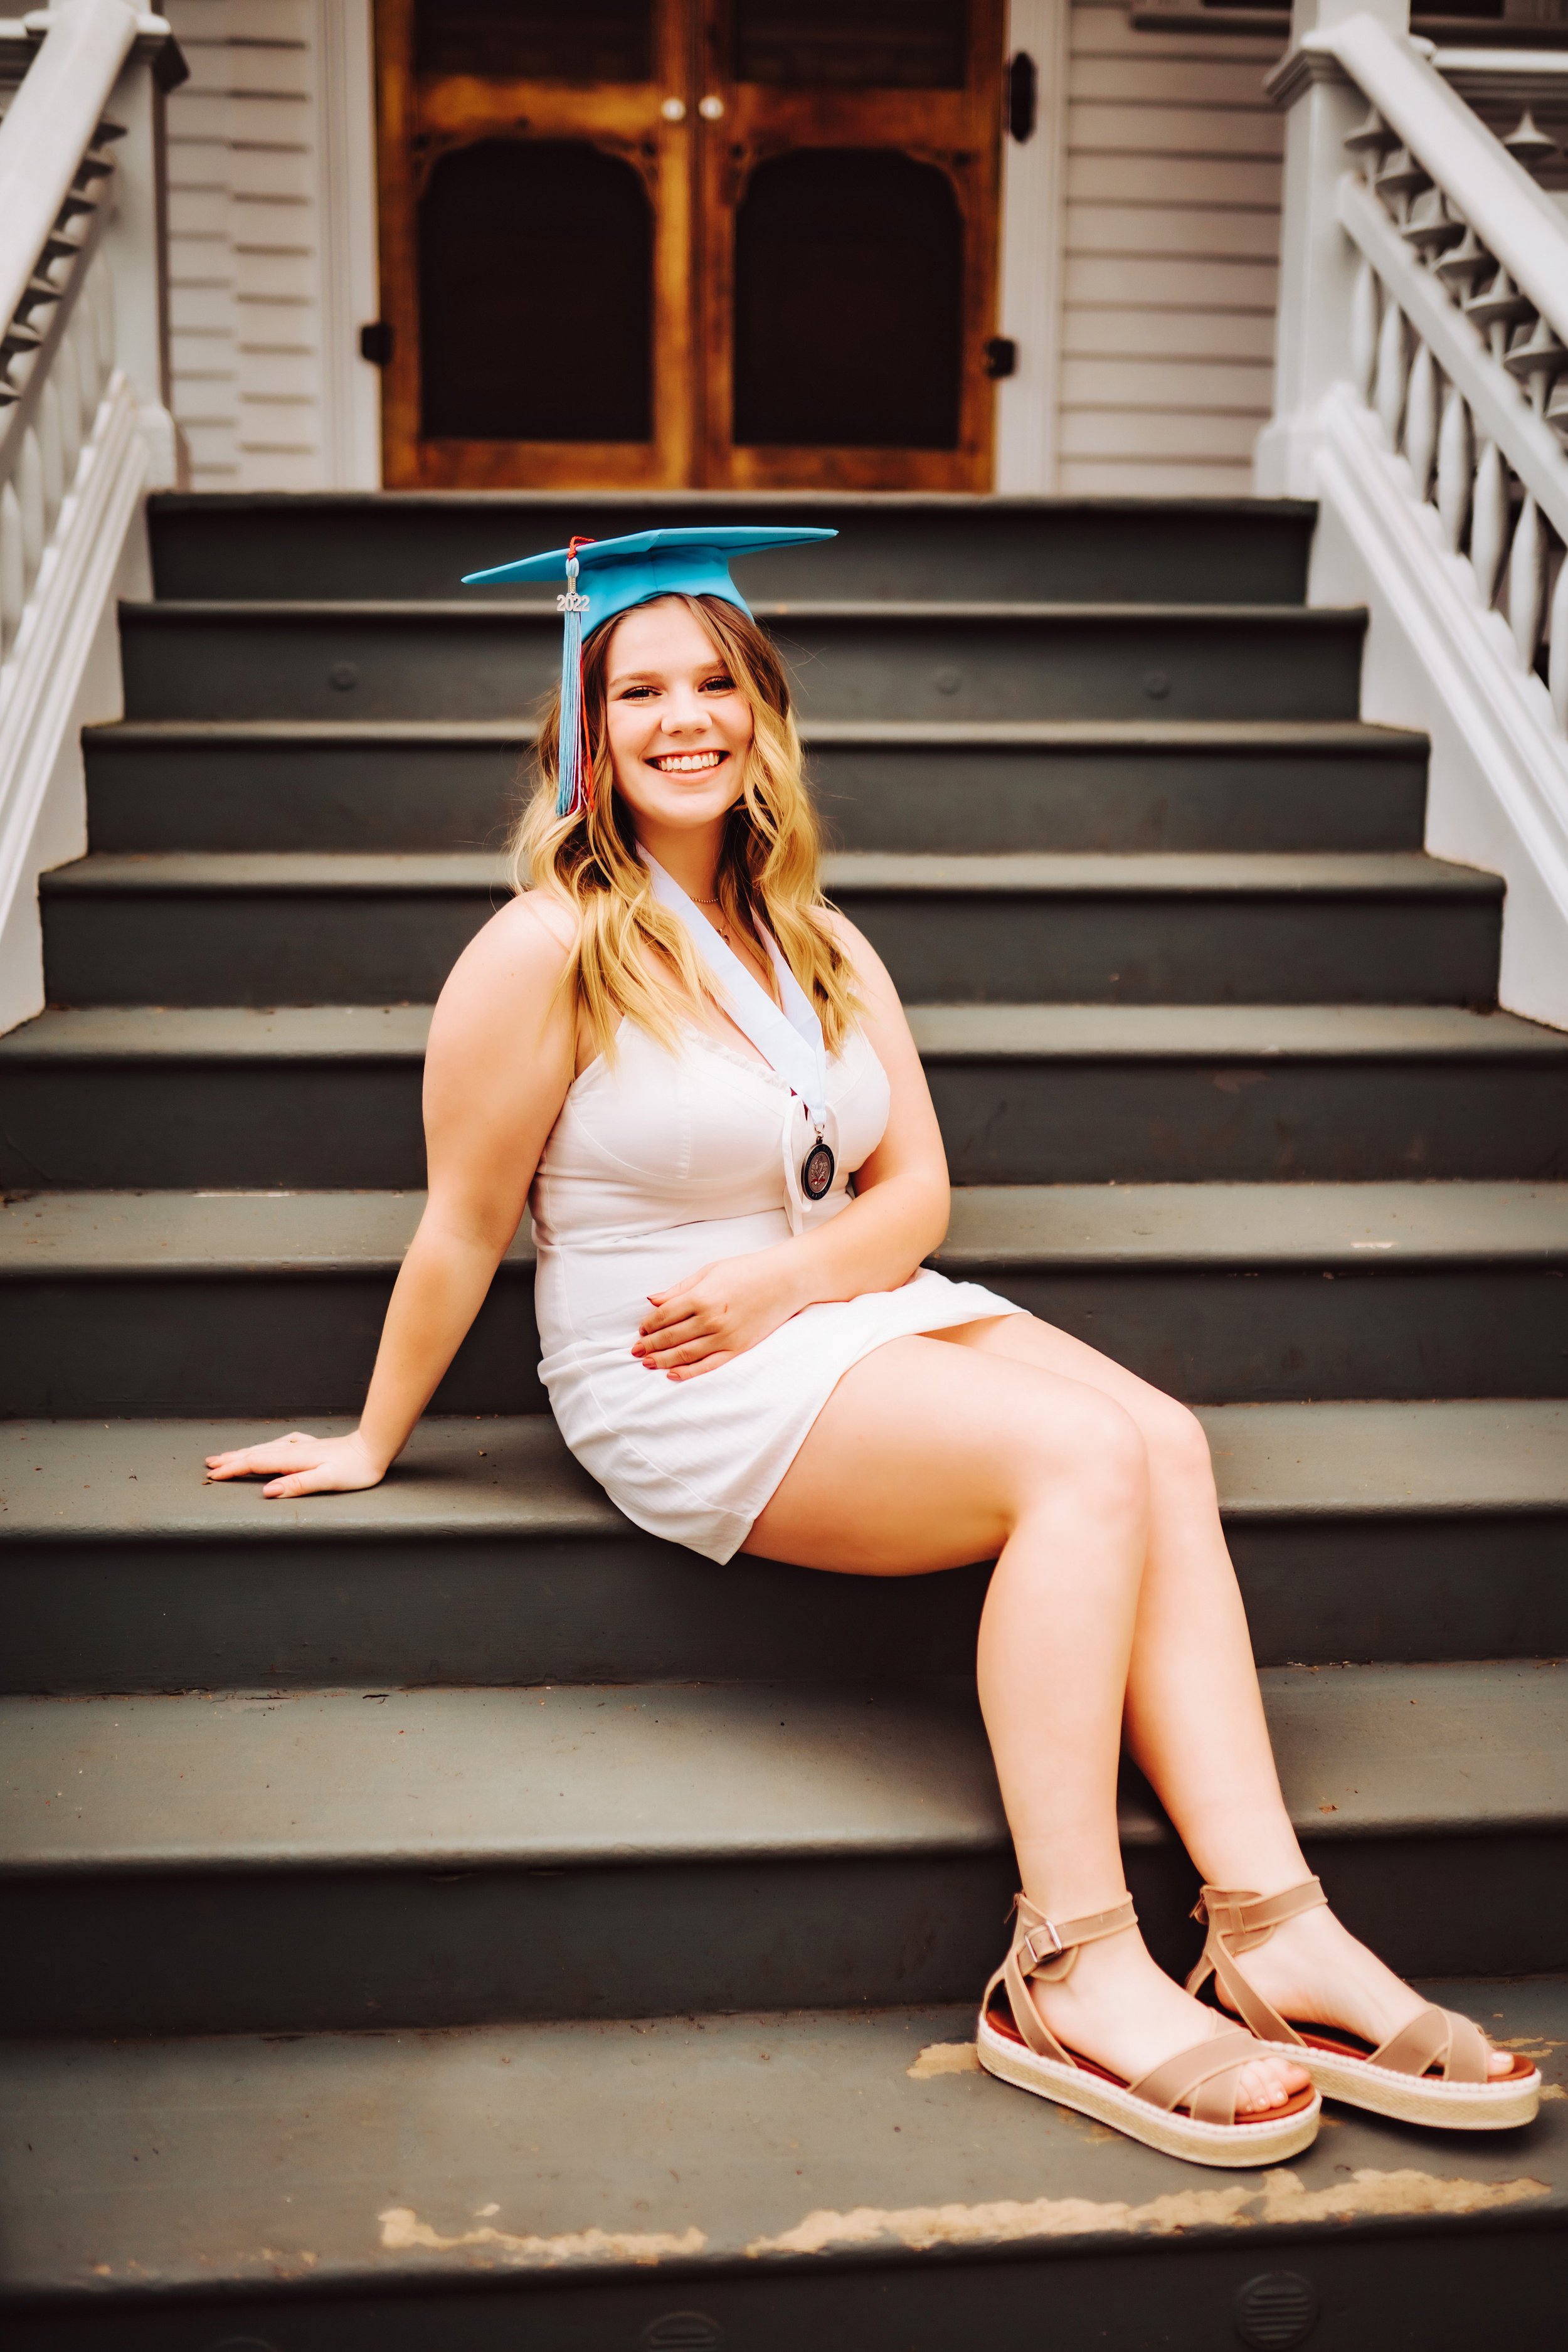 Girl sitting on steps with graduation cap